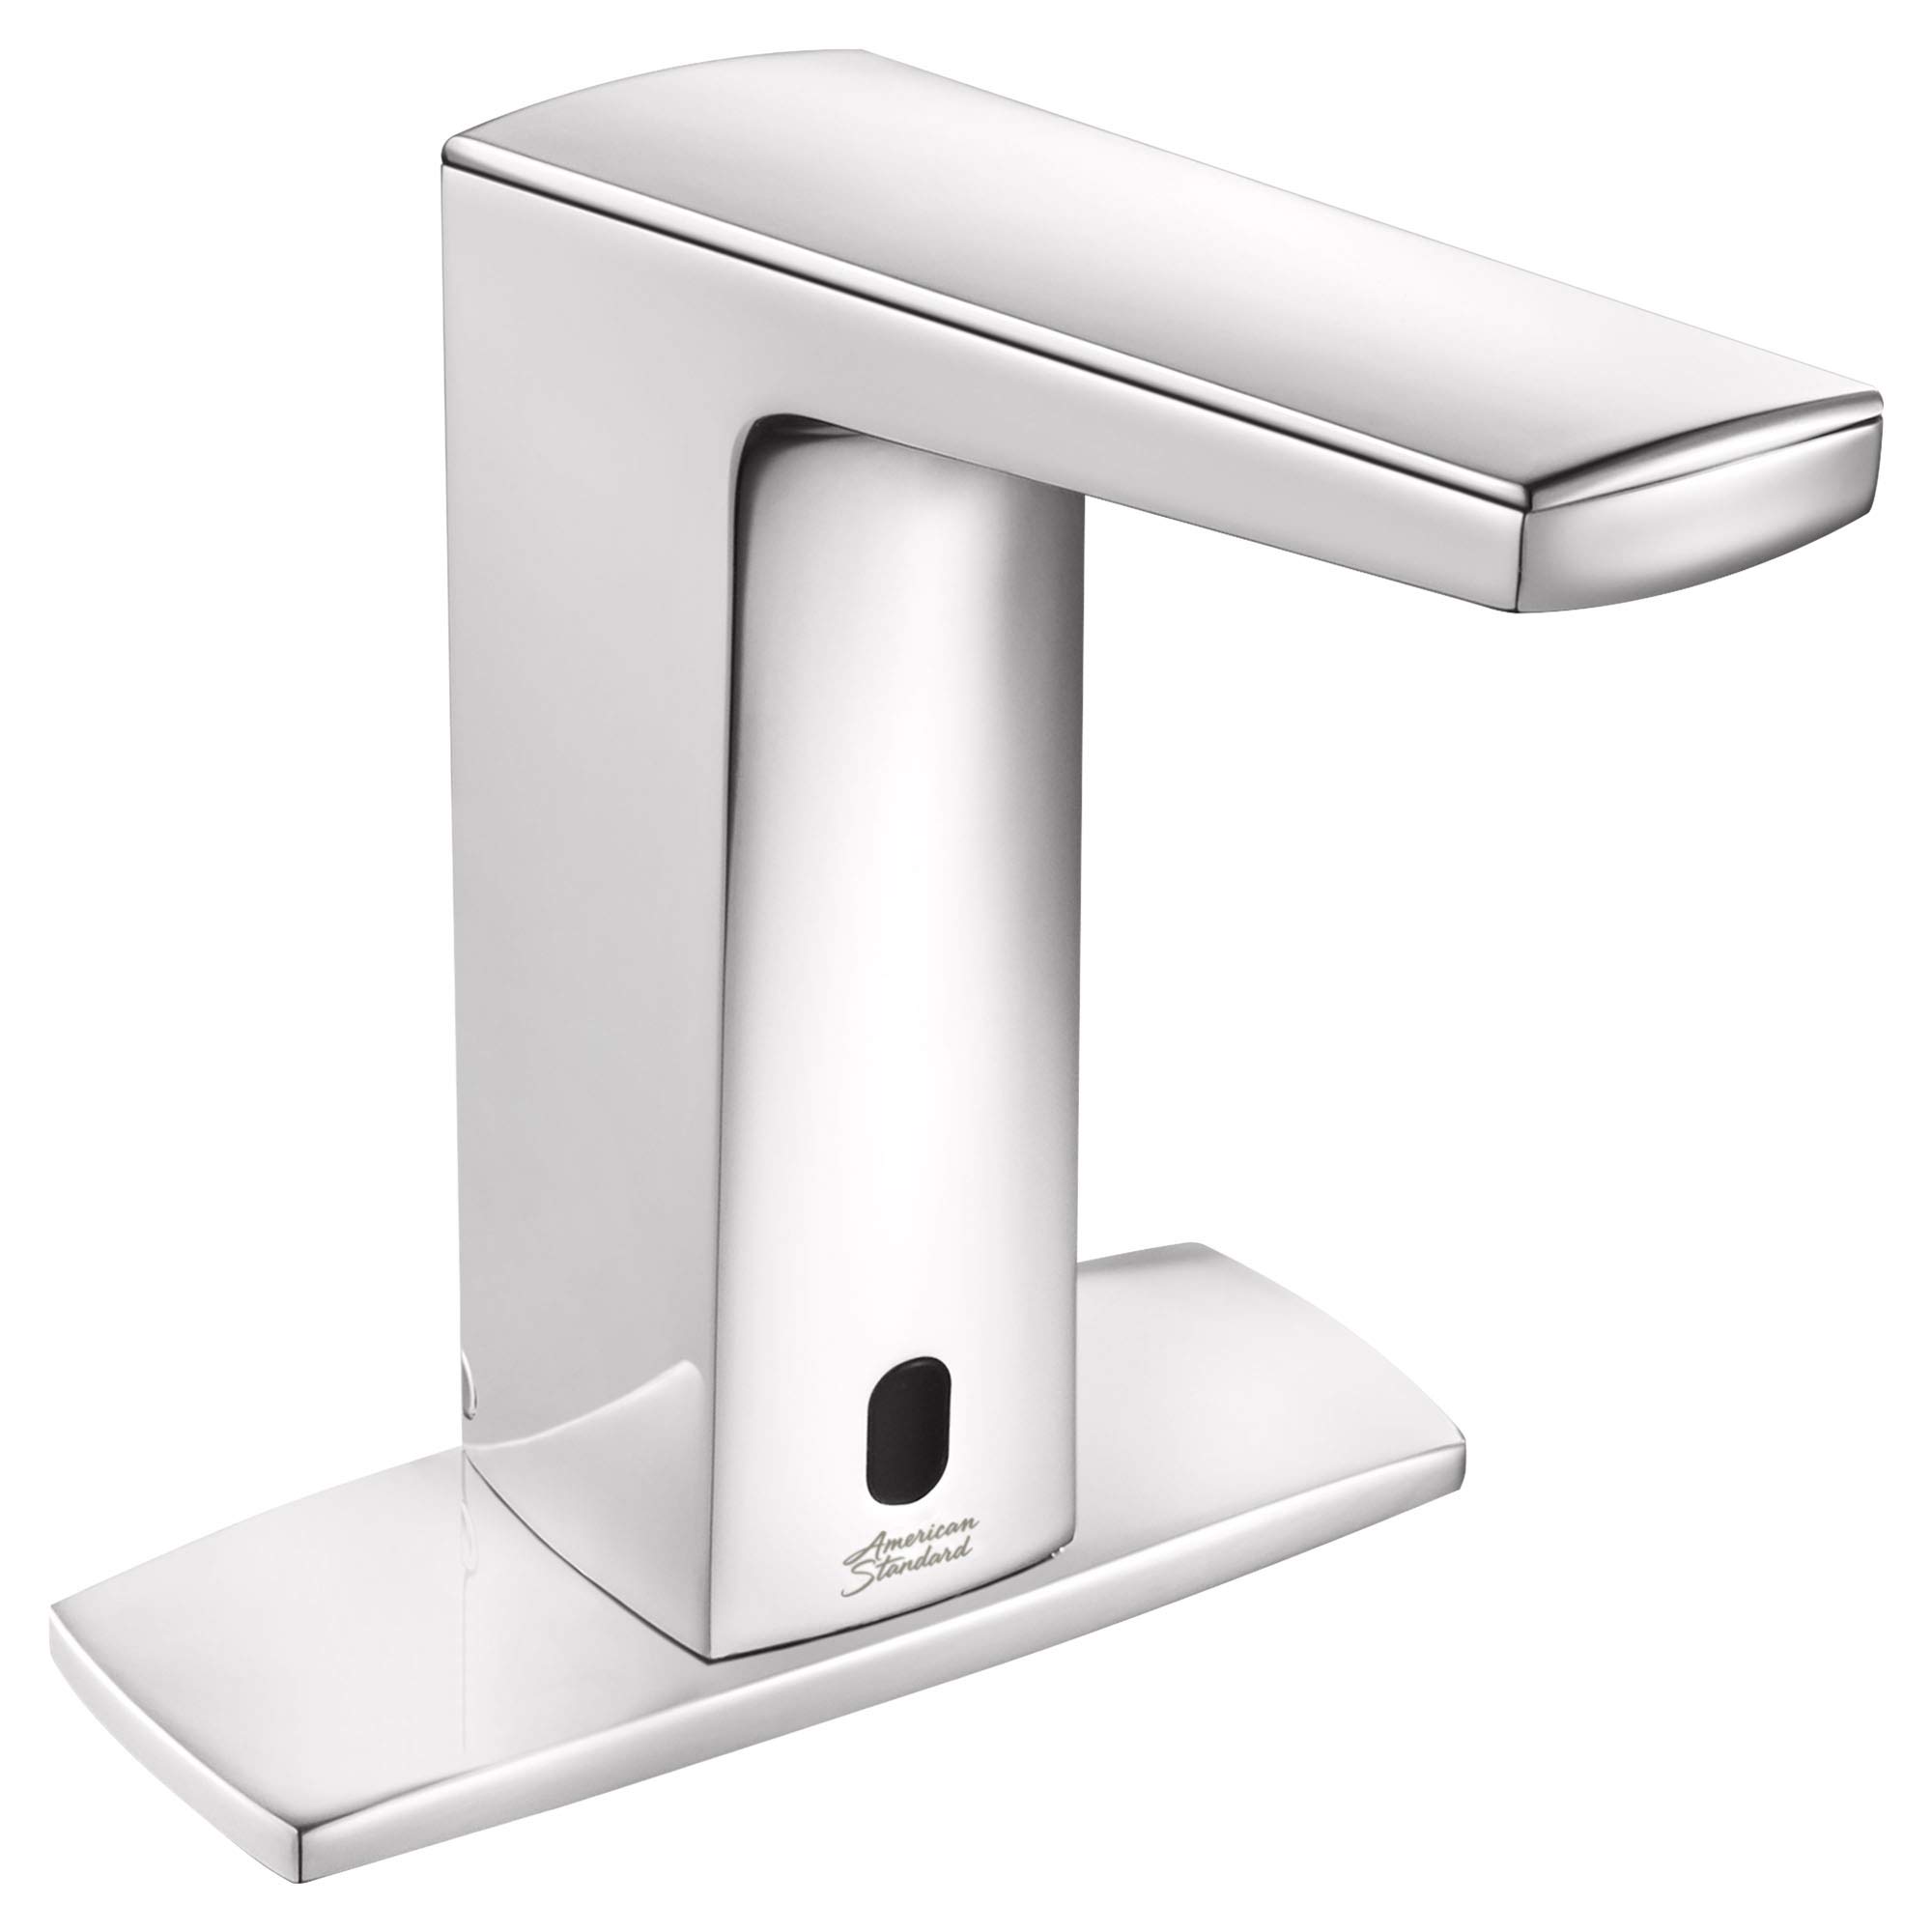 American Standard 7025205.002 Paradigm Selectronic Integrated Faucet with Above-Deck Mixing, Battery-Powered, 0.5 gpm, Polished Chrome